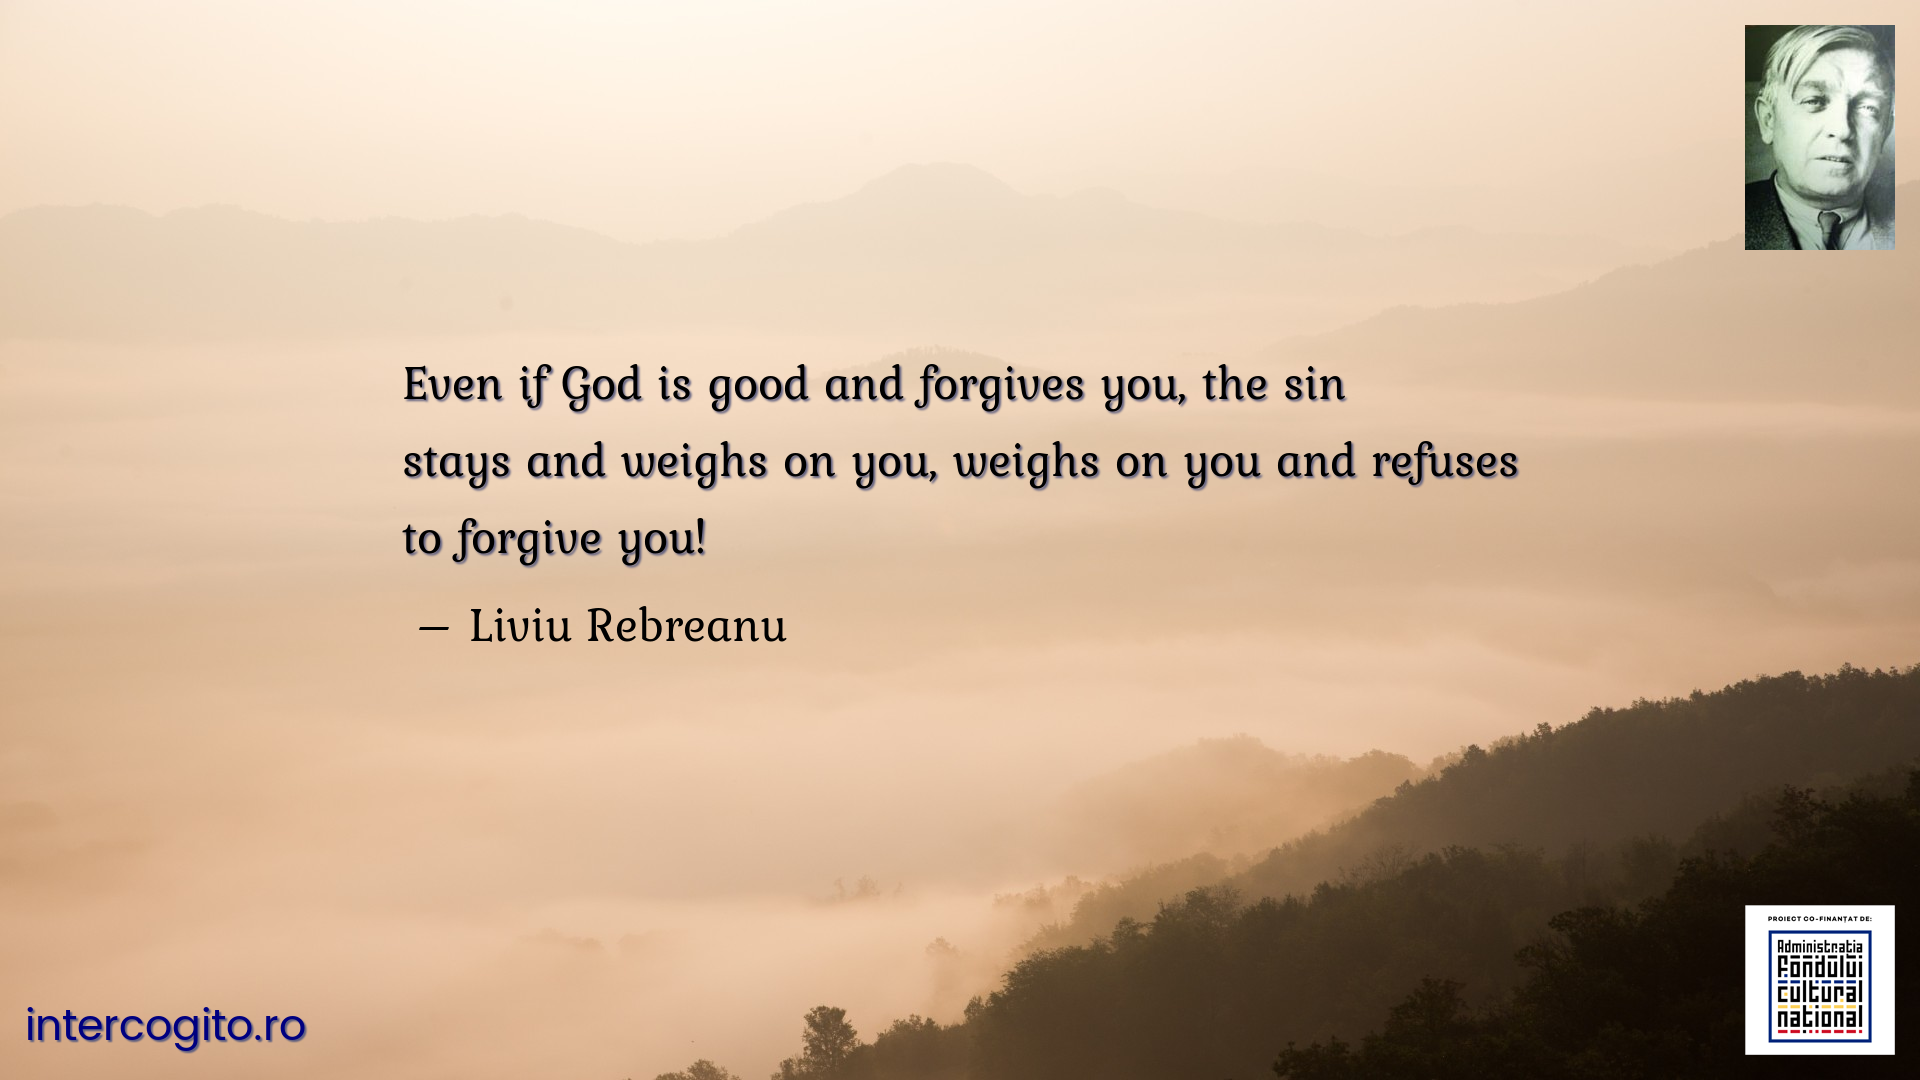 Even if God is good and forgives you, the sin stays and weighs on you, weighs on you and refuses to forgive you!